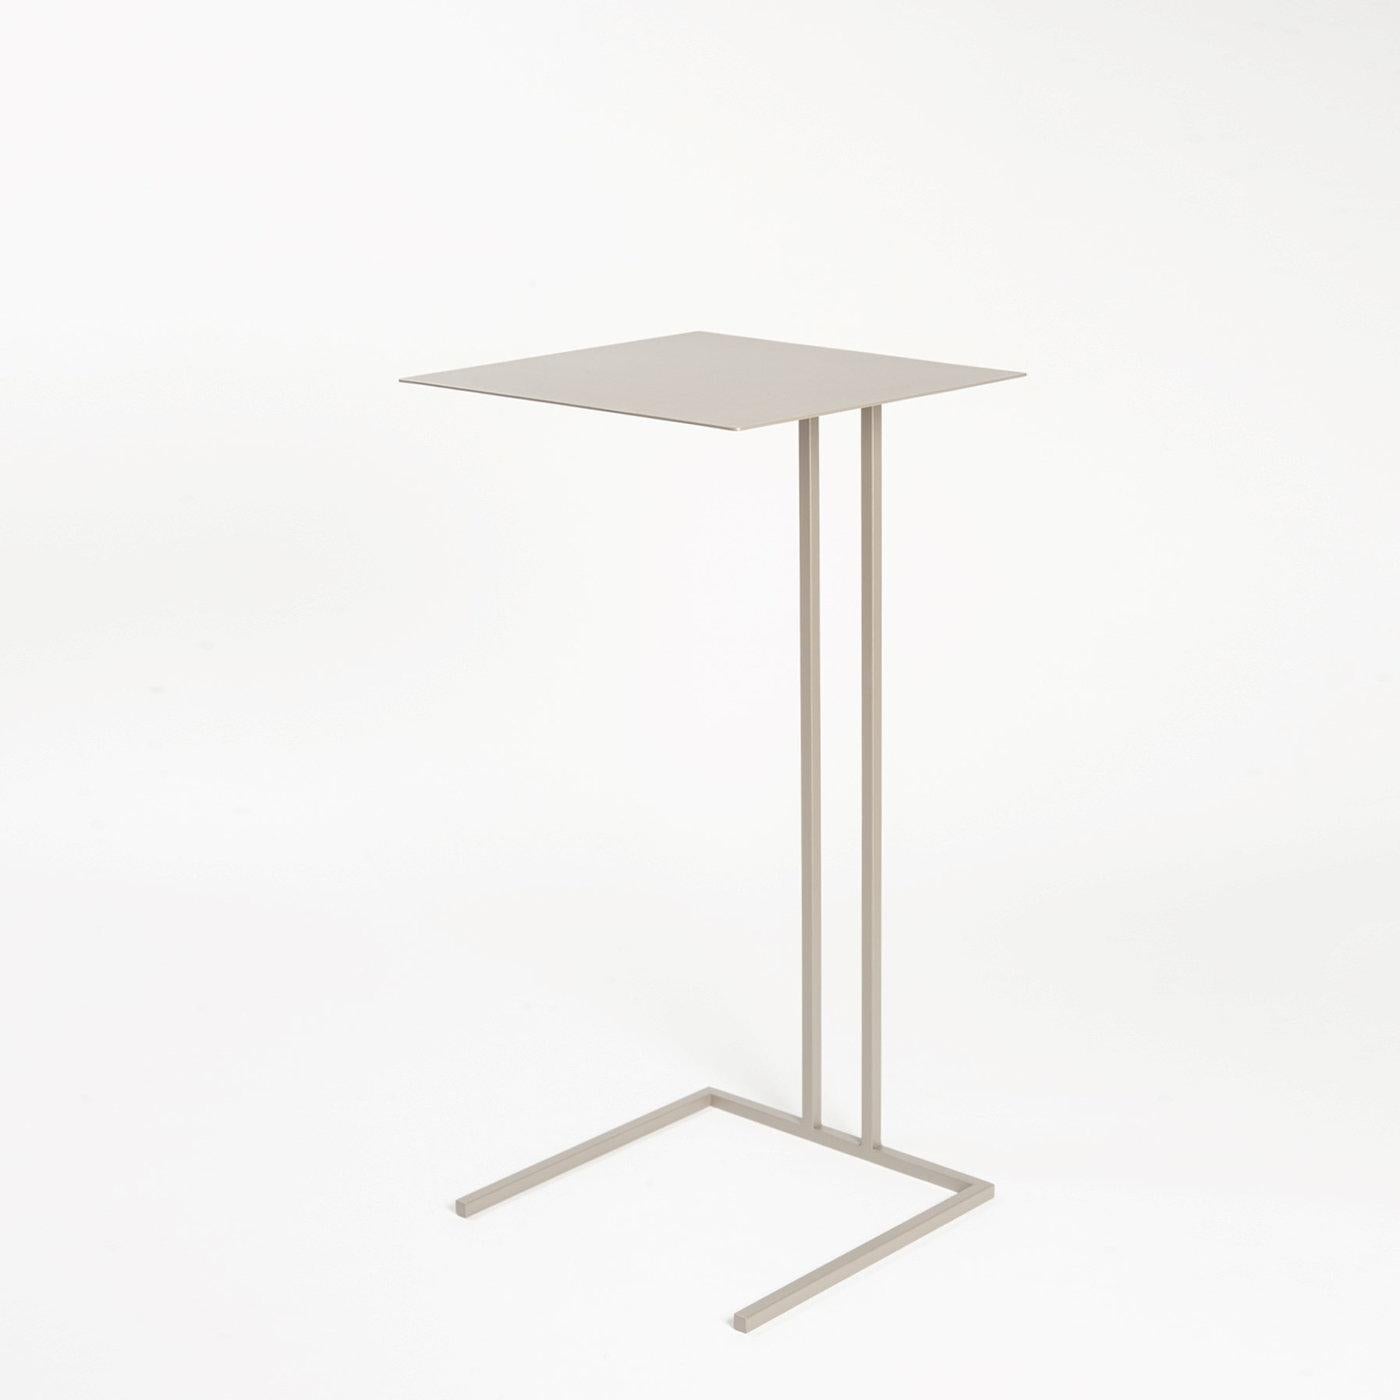 An exercise in graceful minimalism, this side table takes its name from the 